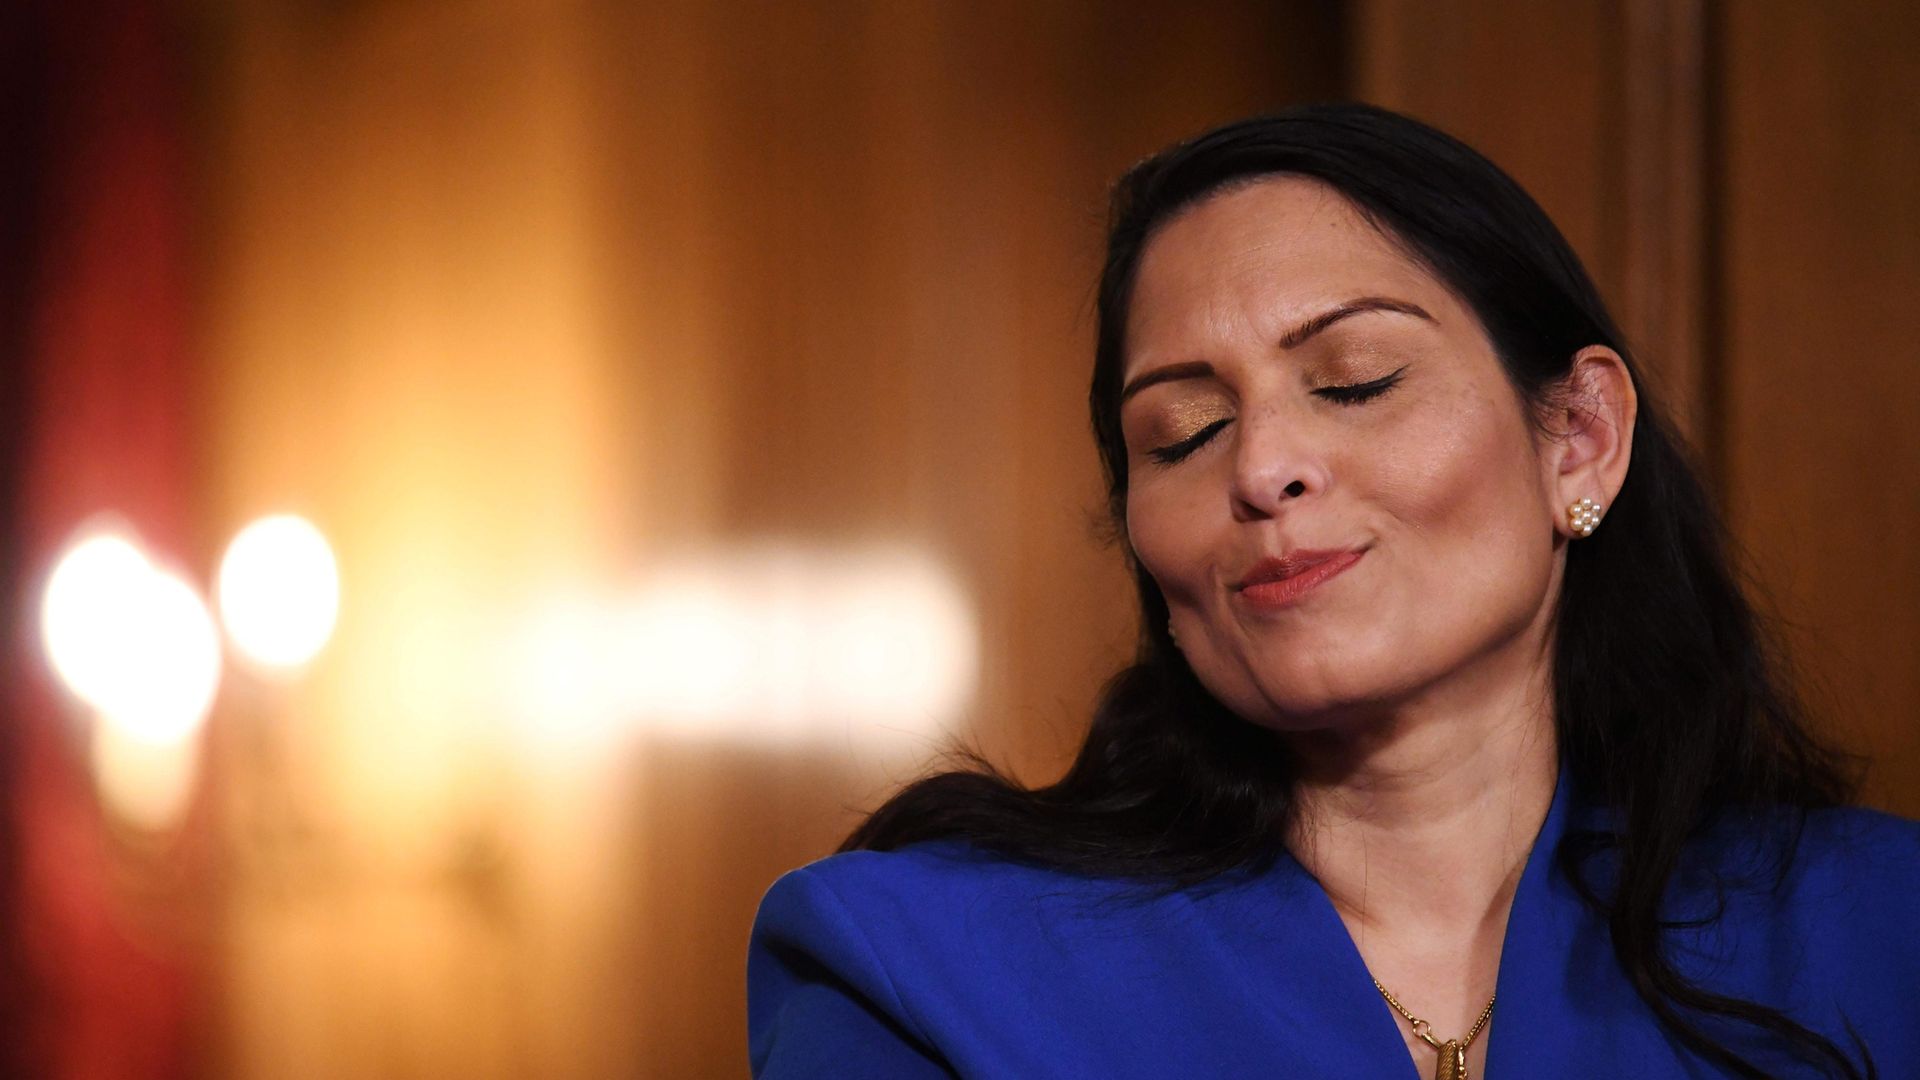 Priti Patel at a Covid briefing in January 2021. Photo: POOL/AFP via Getty Images